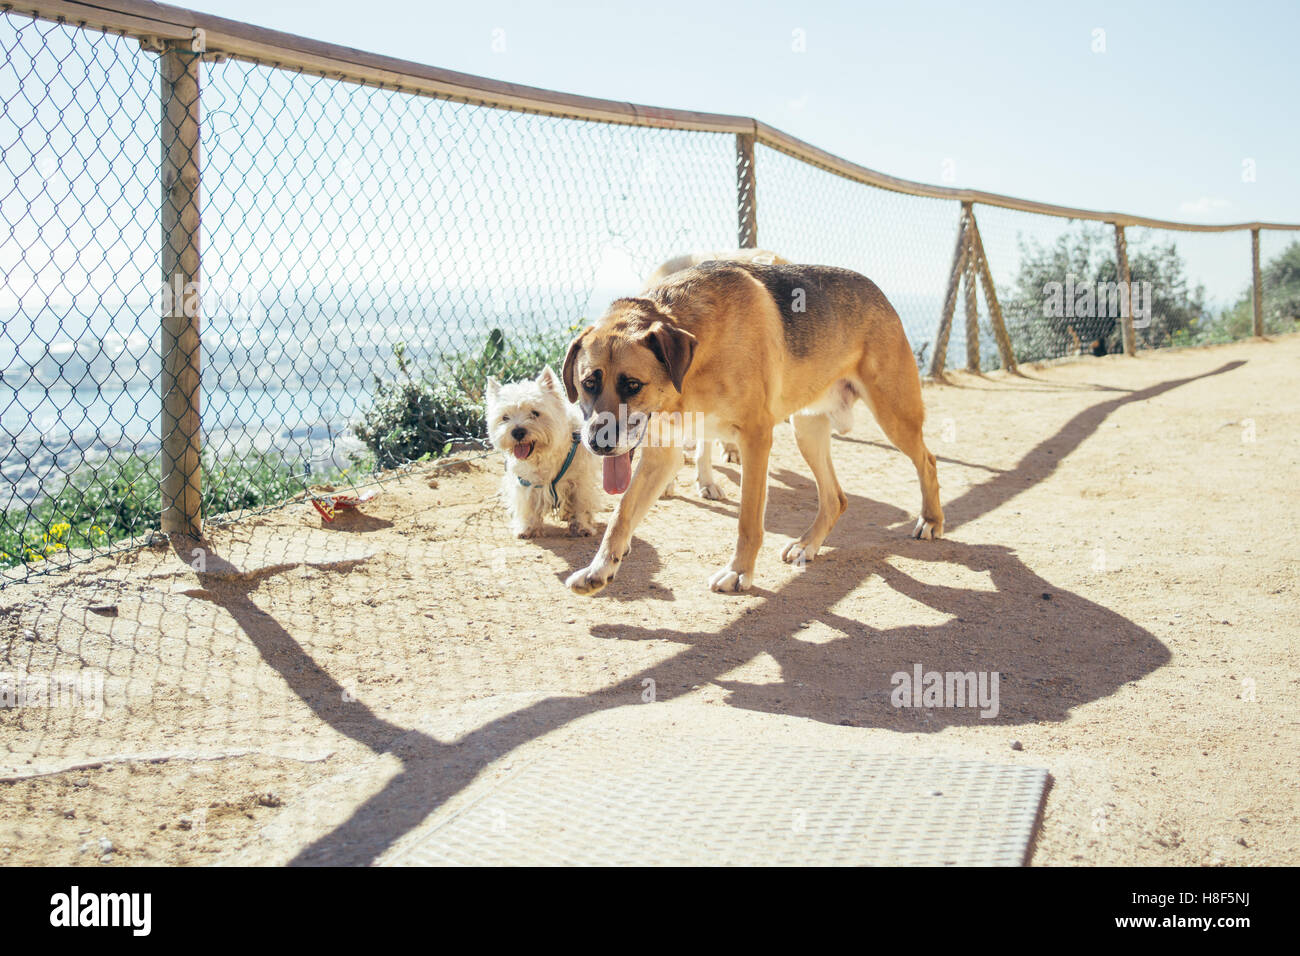 Two dogs walking off leash on a sandy path in the sun. Stock Photo